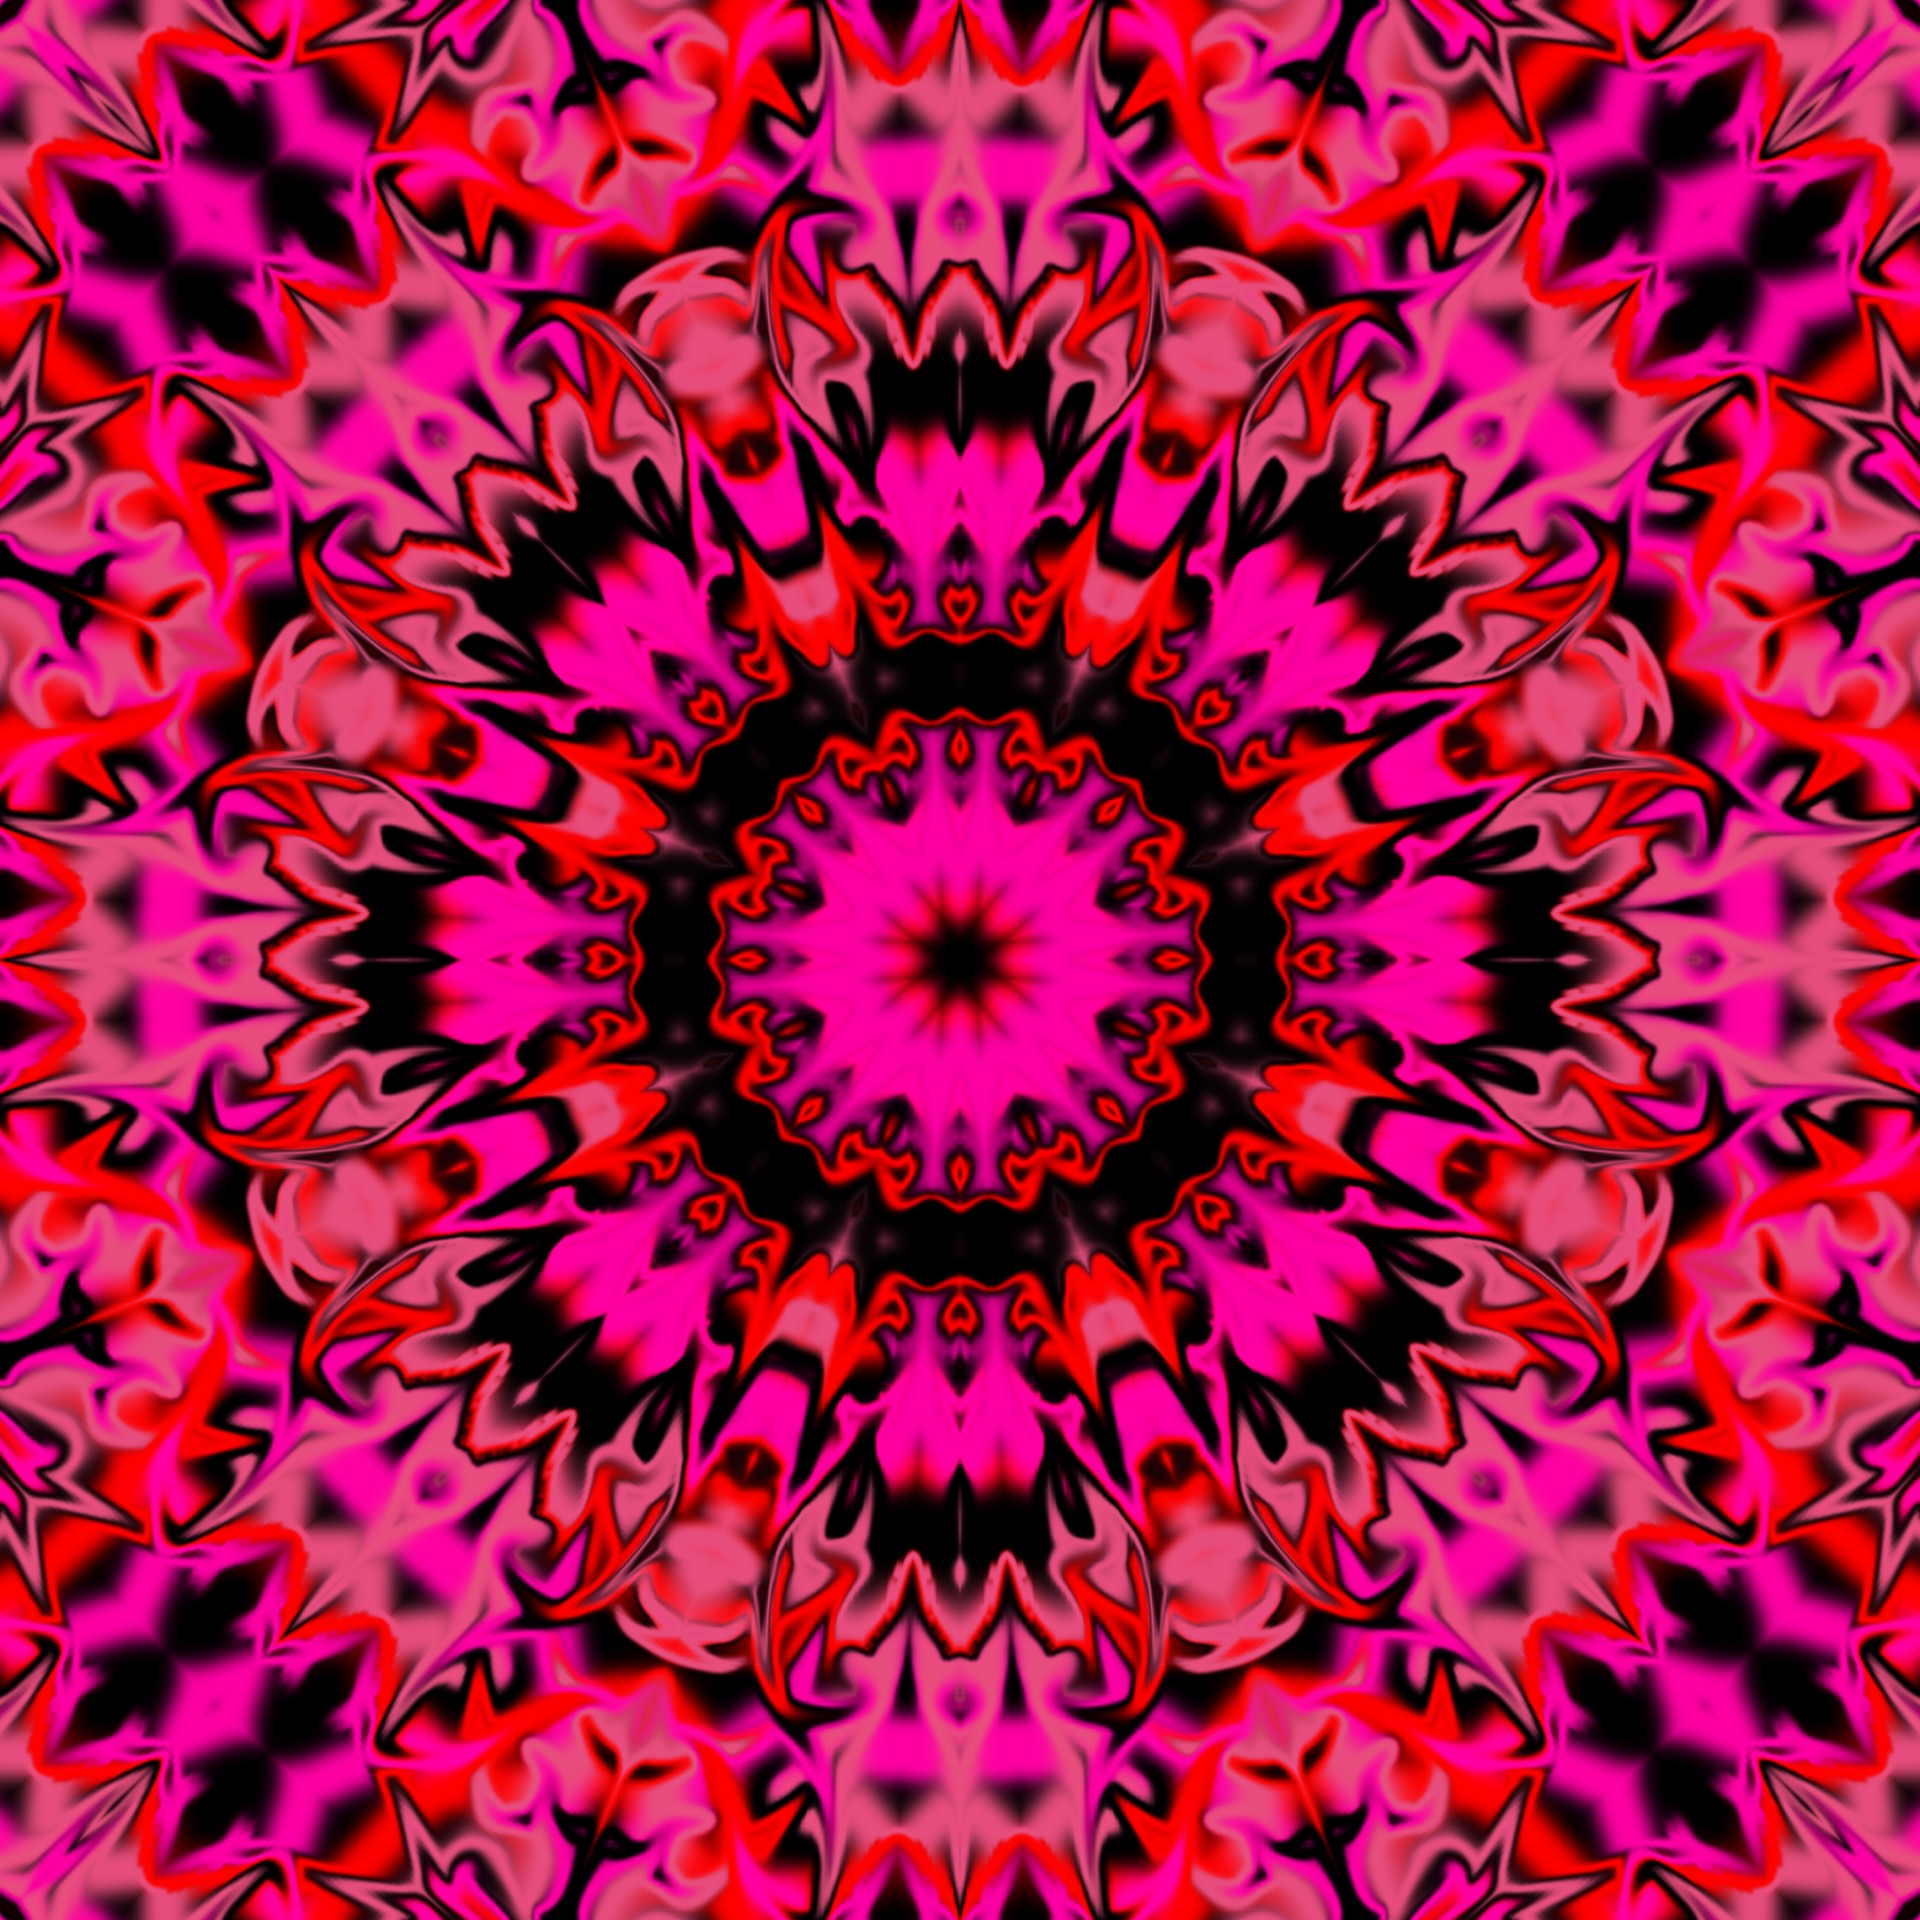 Red, Pink, And Black Kaleidoscope